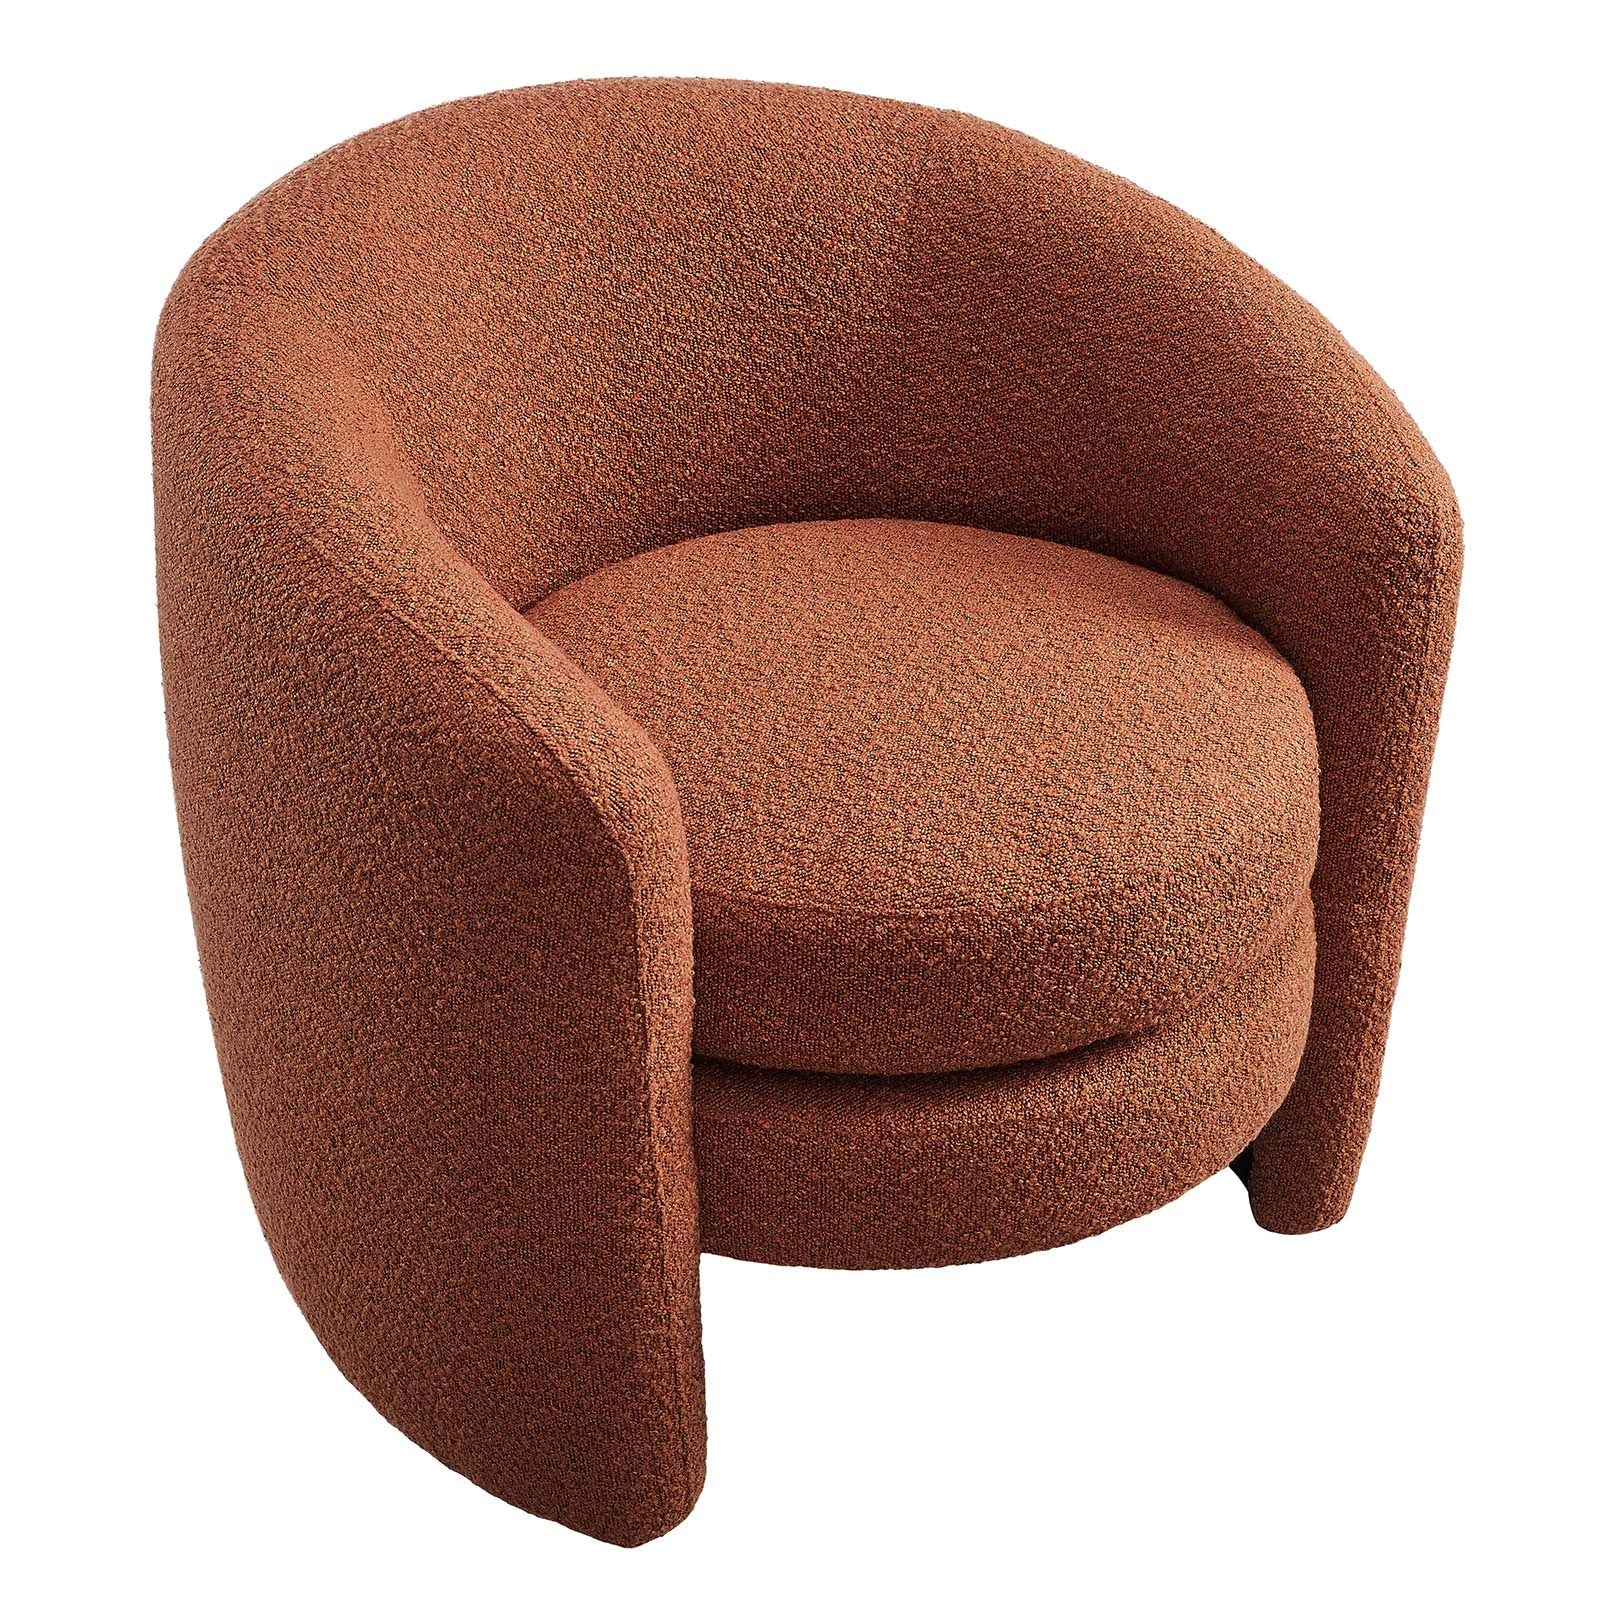 Affinity Upholstered Boucle Fabric Curved Back Armchair - East Shore Modern Home Furnishings